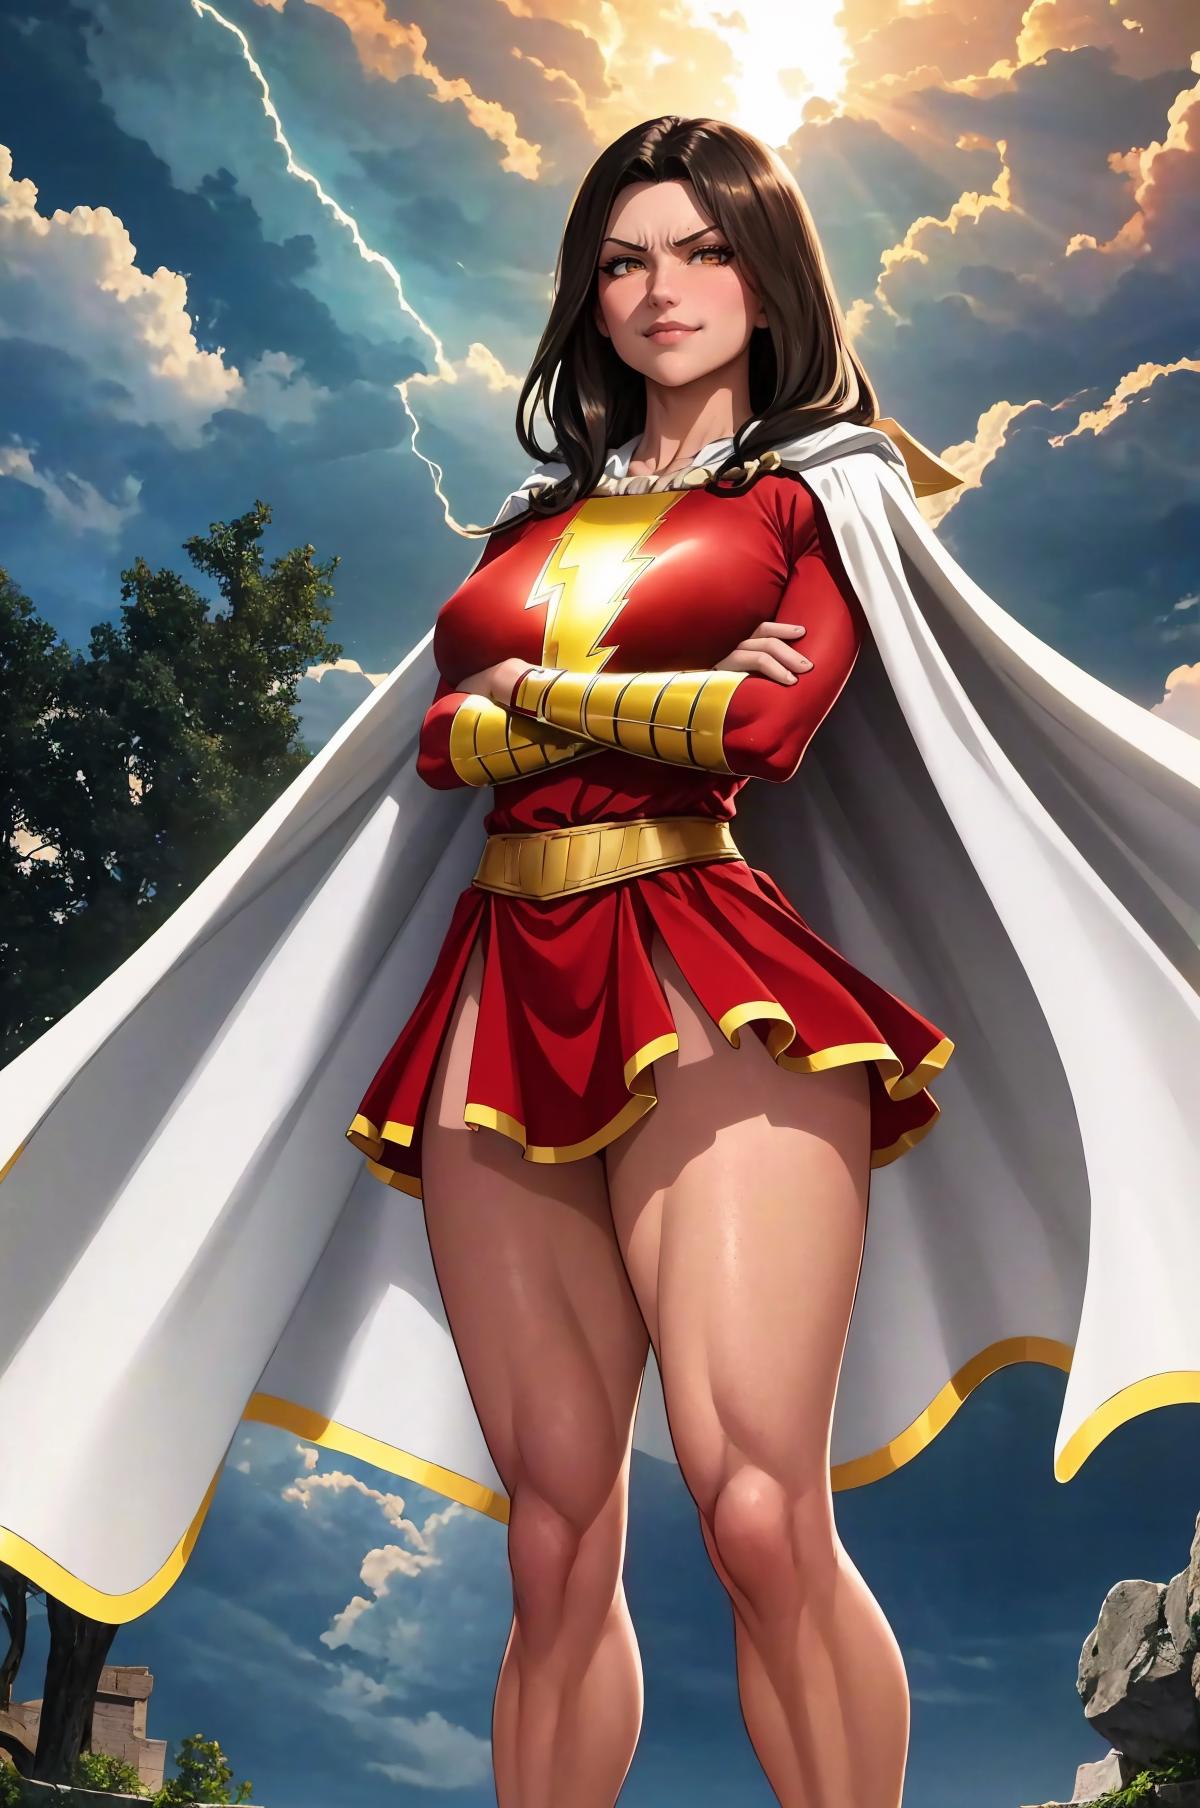 Mary Marvel (DC Comics) LoRA image by FroggyWoggy